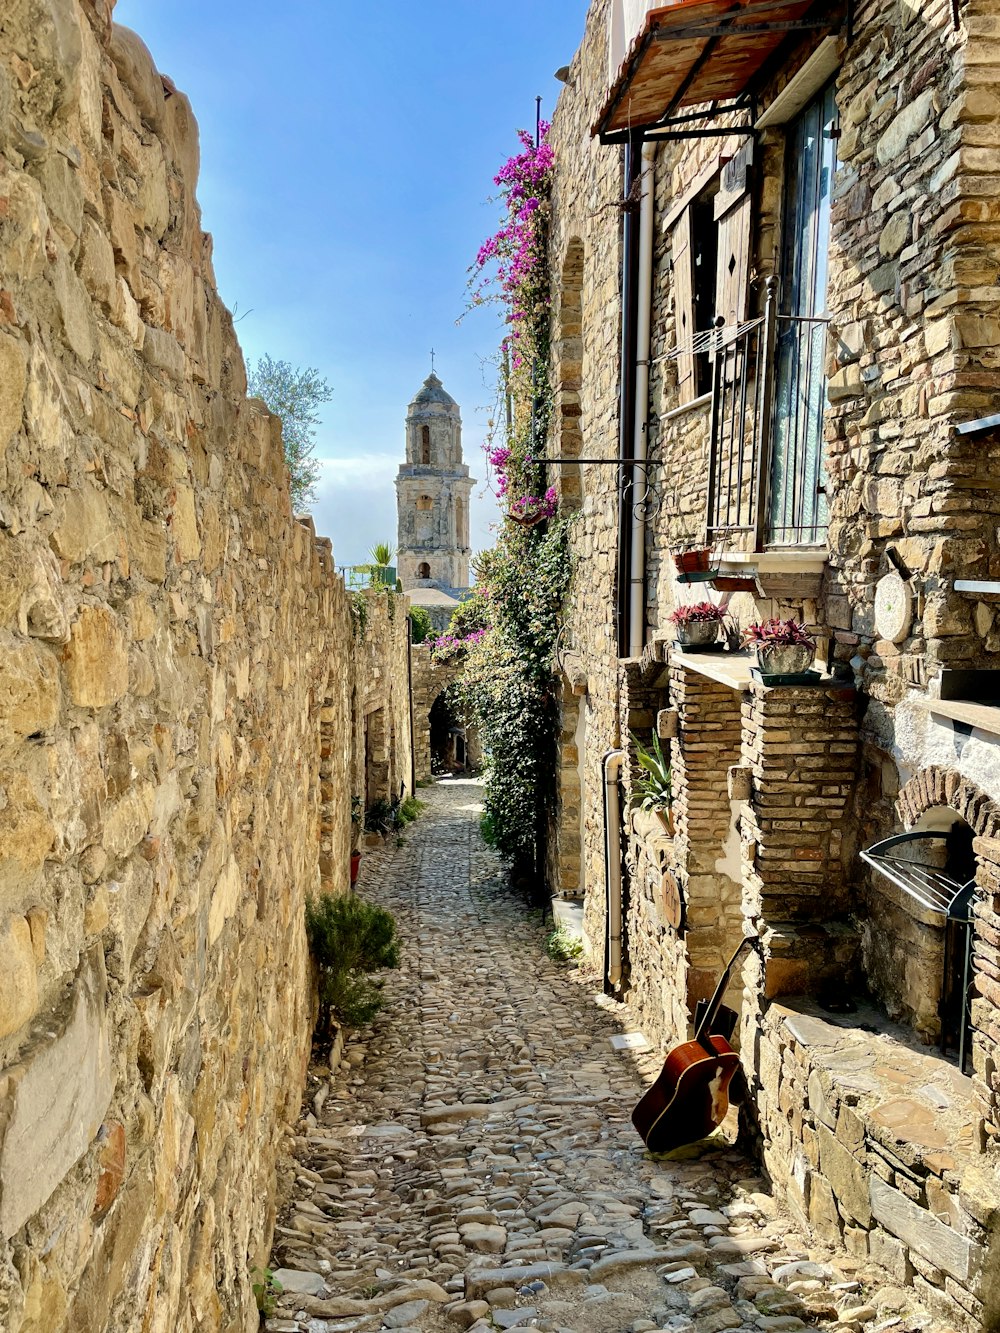 a cobblestone street with a guitar leaning against a stone wall